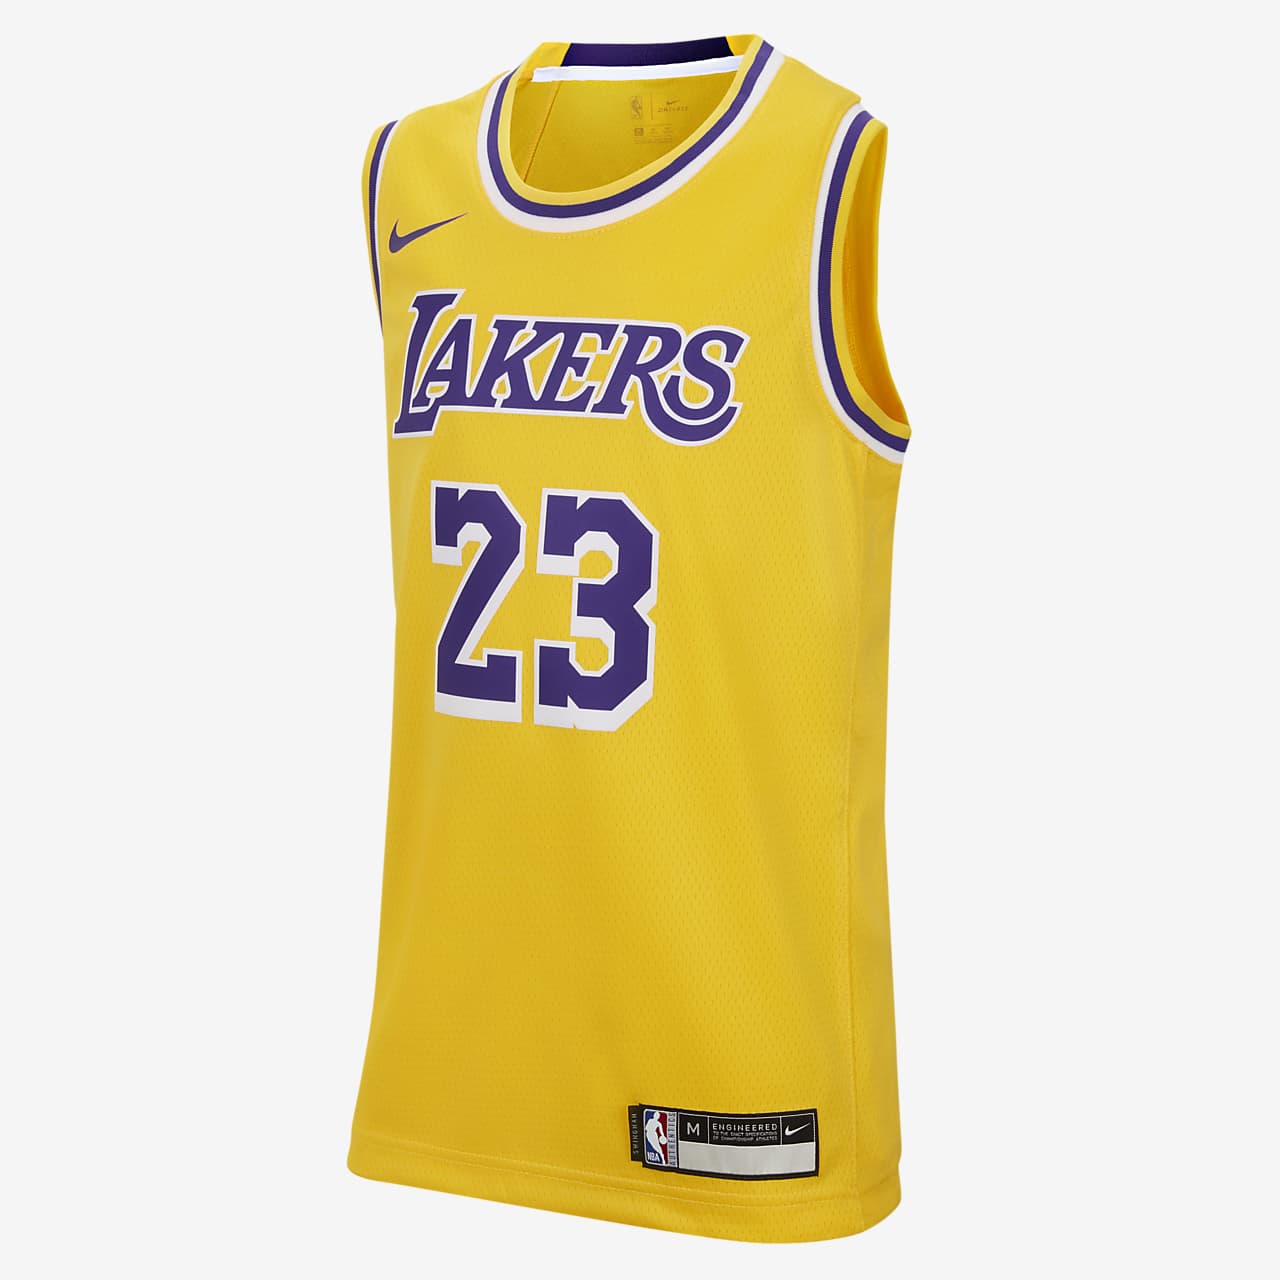 lakers kids clothes